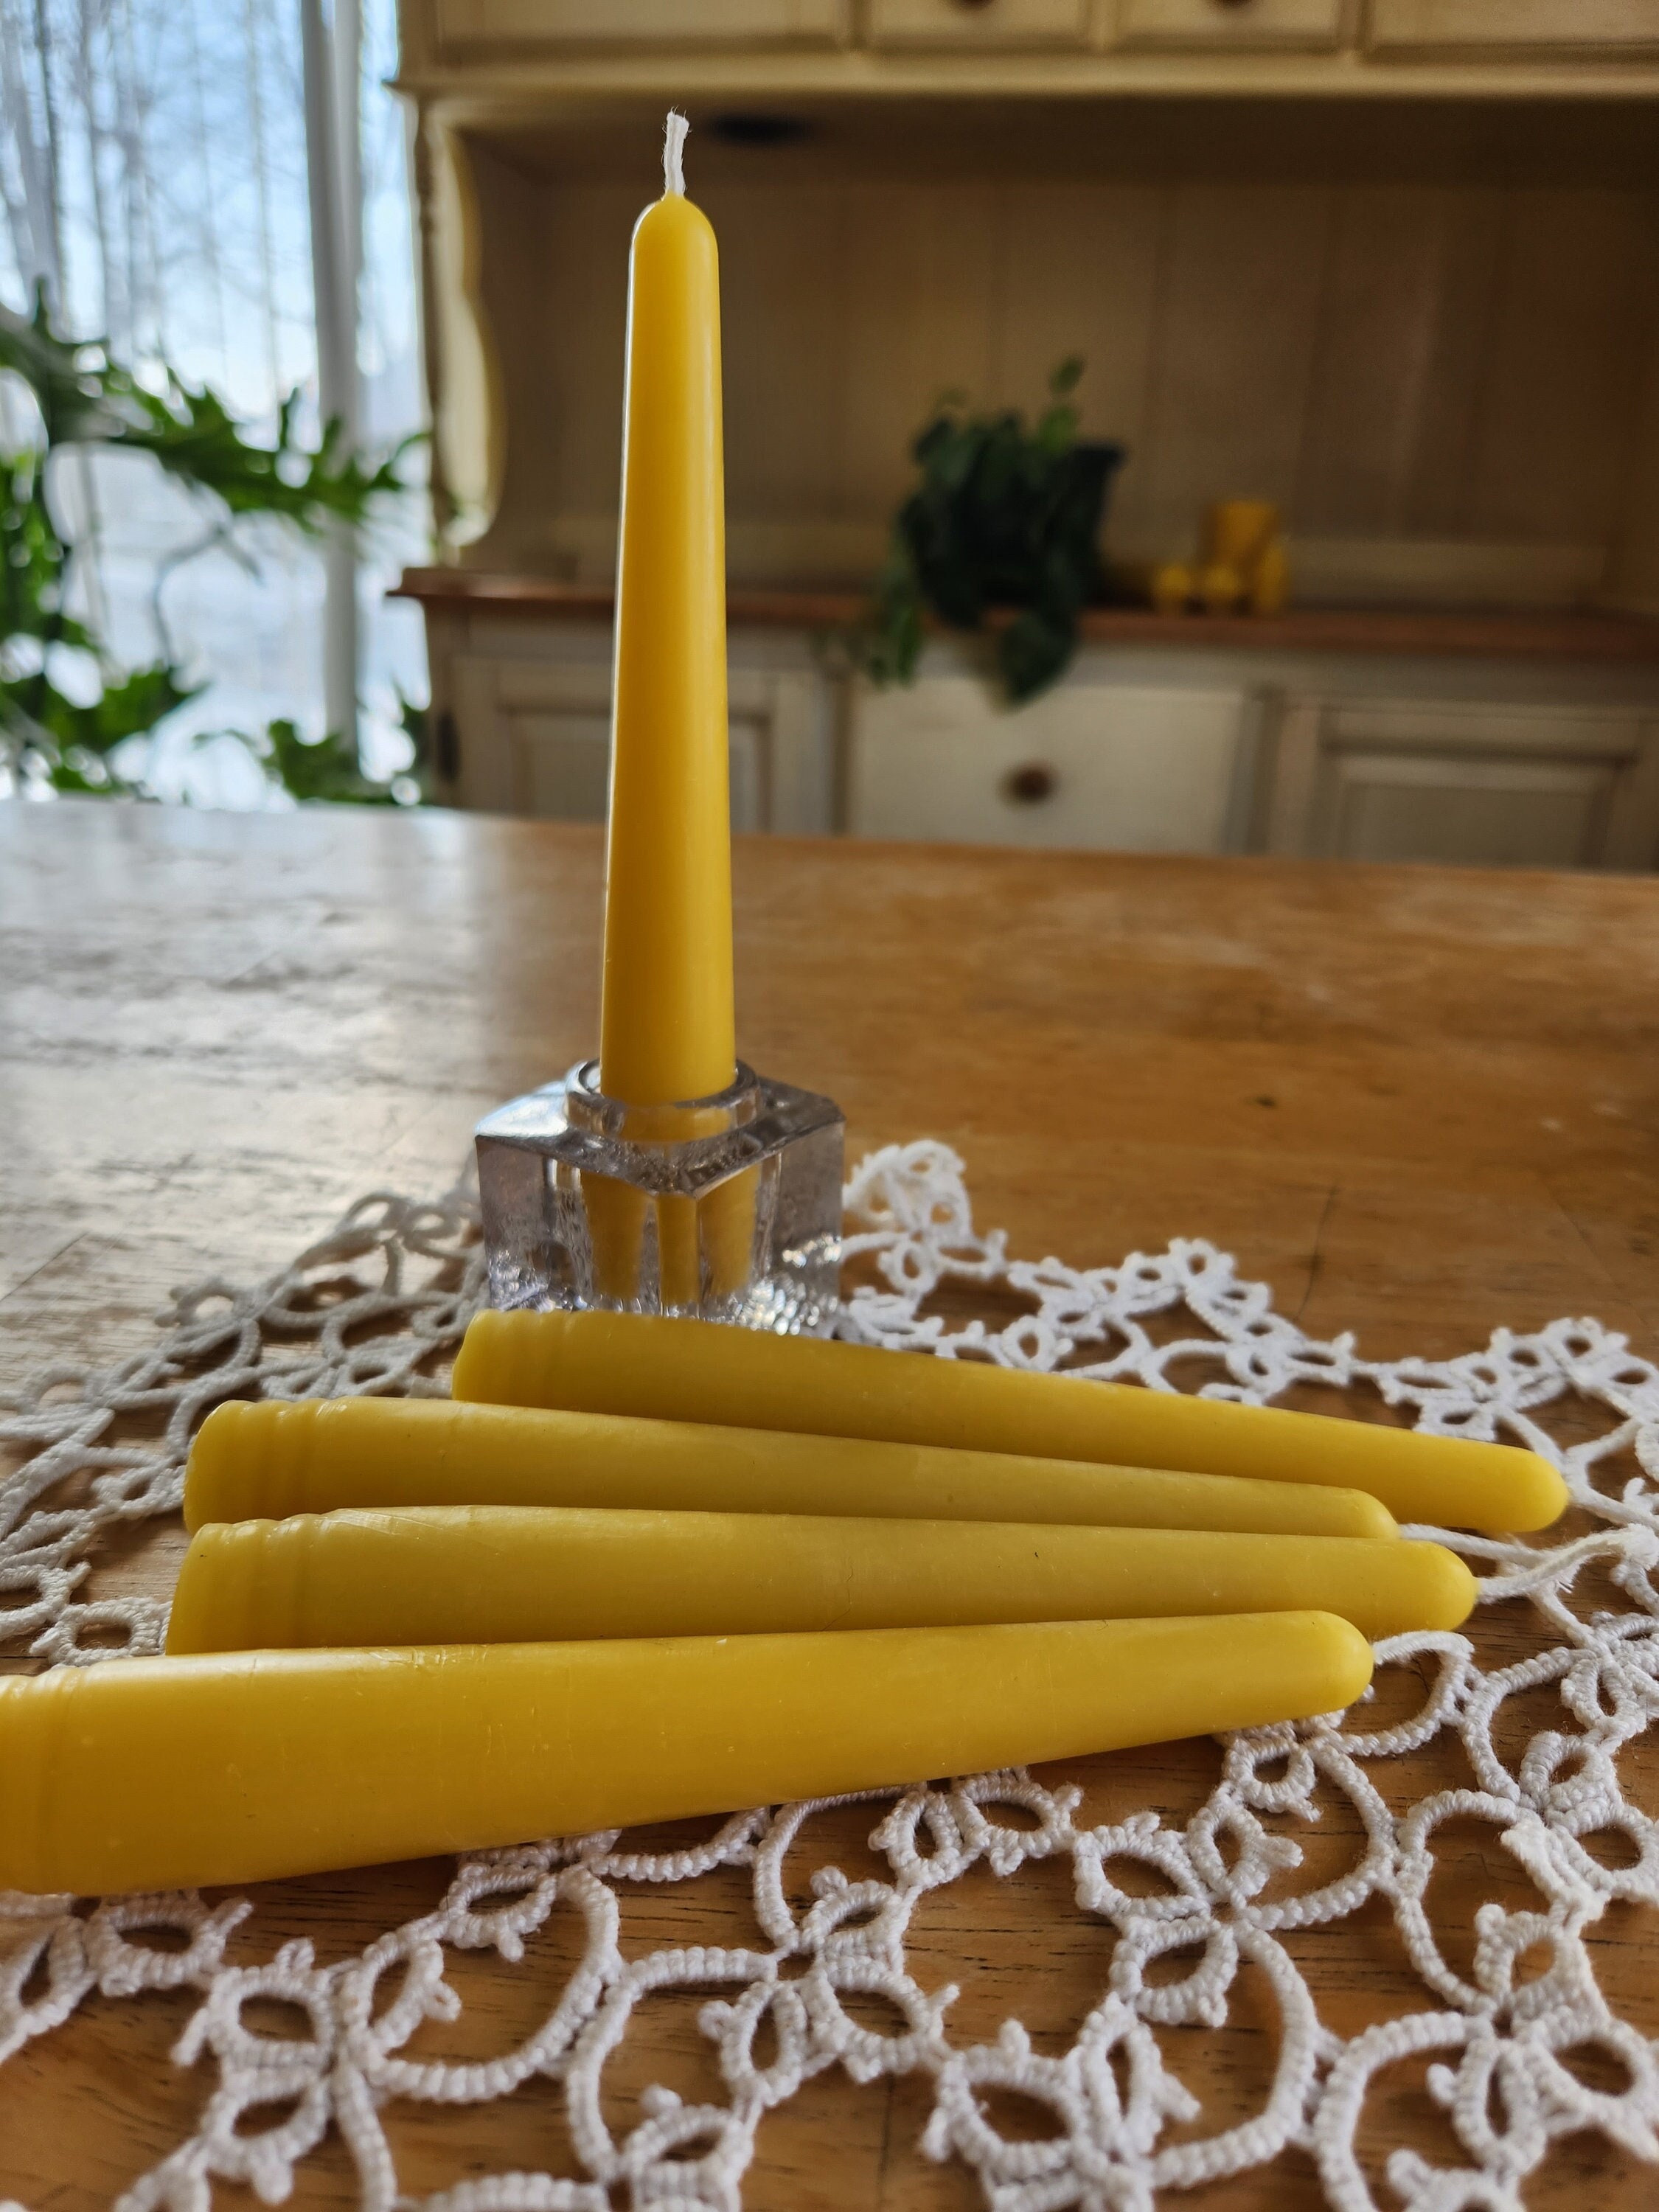 Pure Beeswax Votive Candles - Handmade Candles - BlessedMart